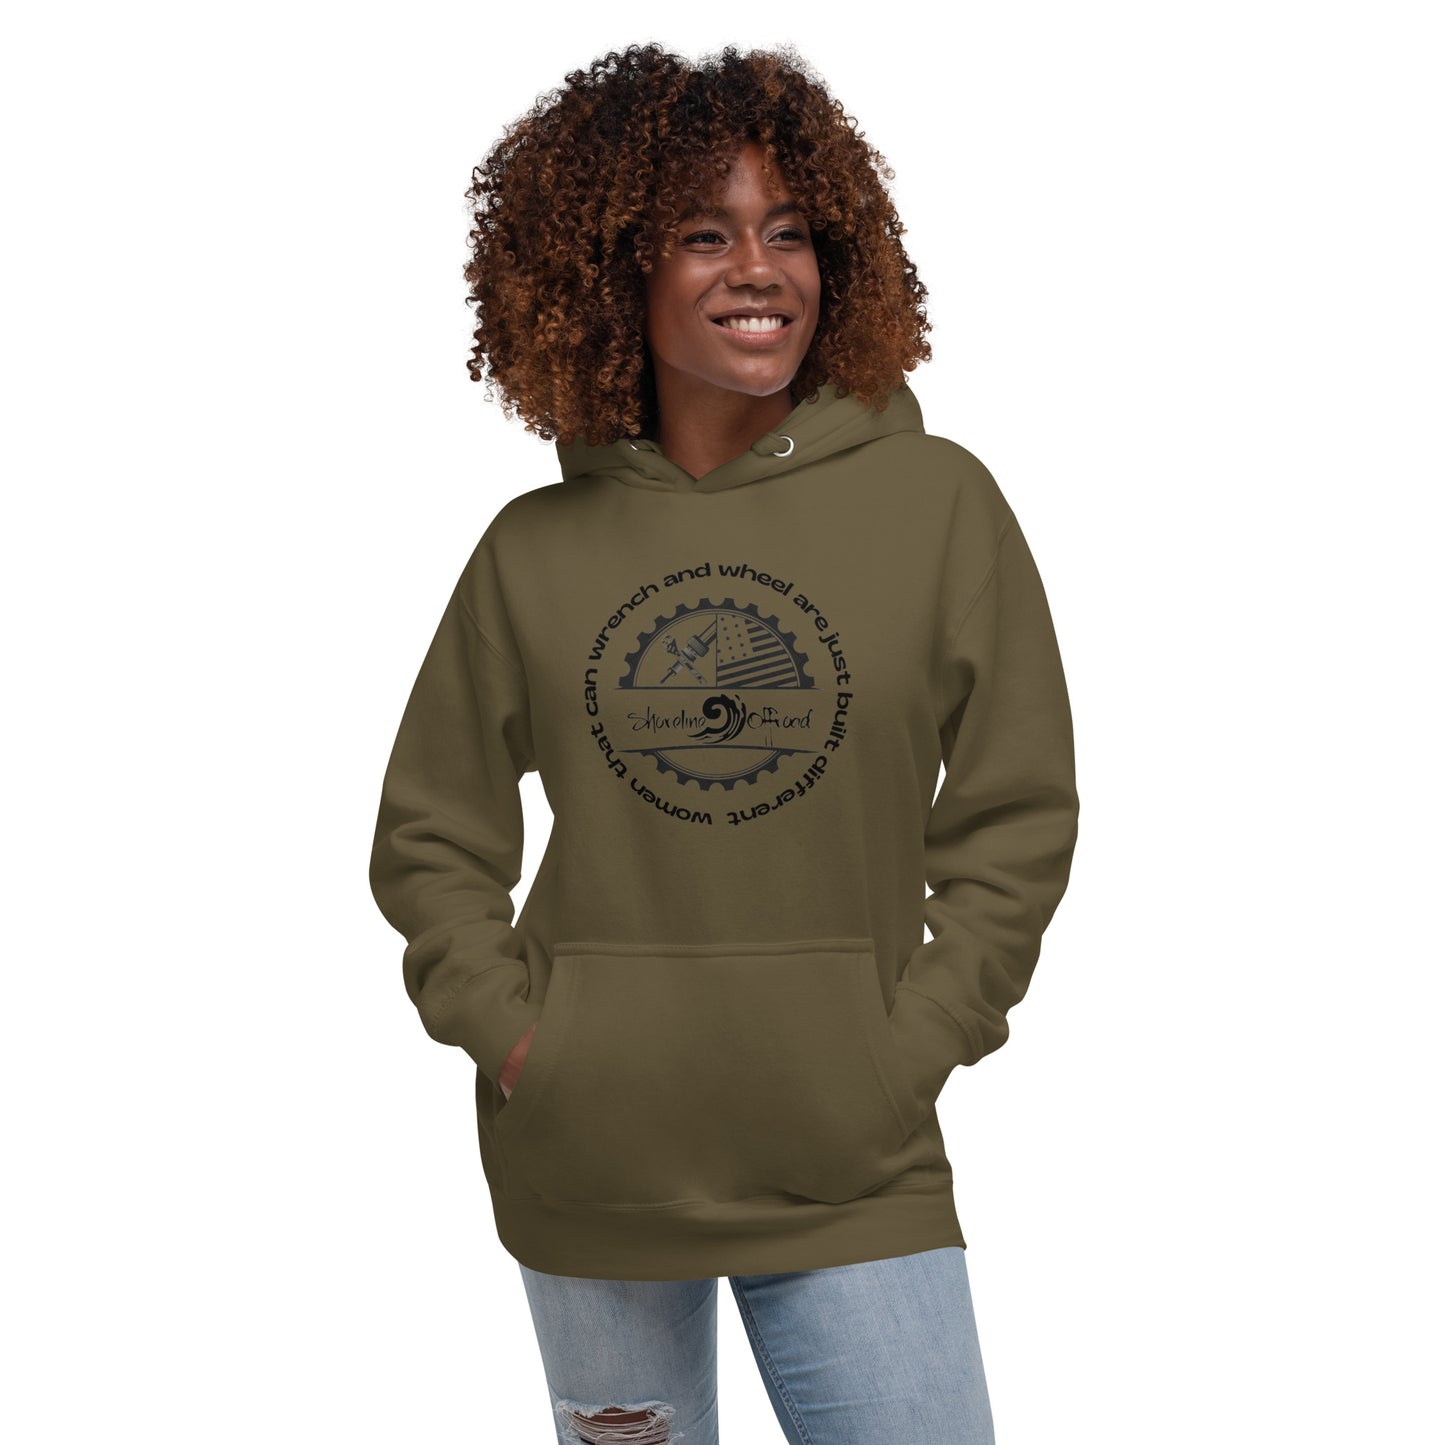 a woman wearing a brown hoodie with a mountain scene on it